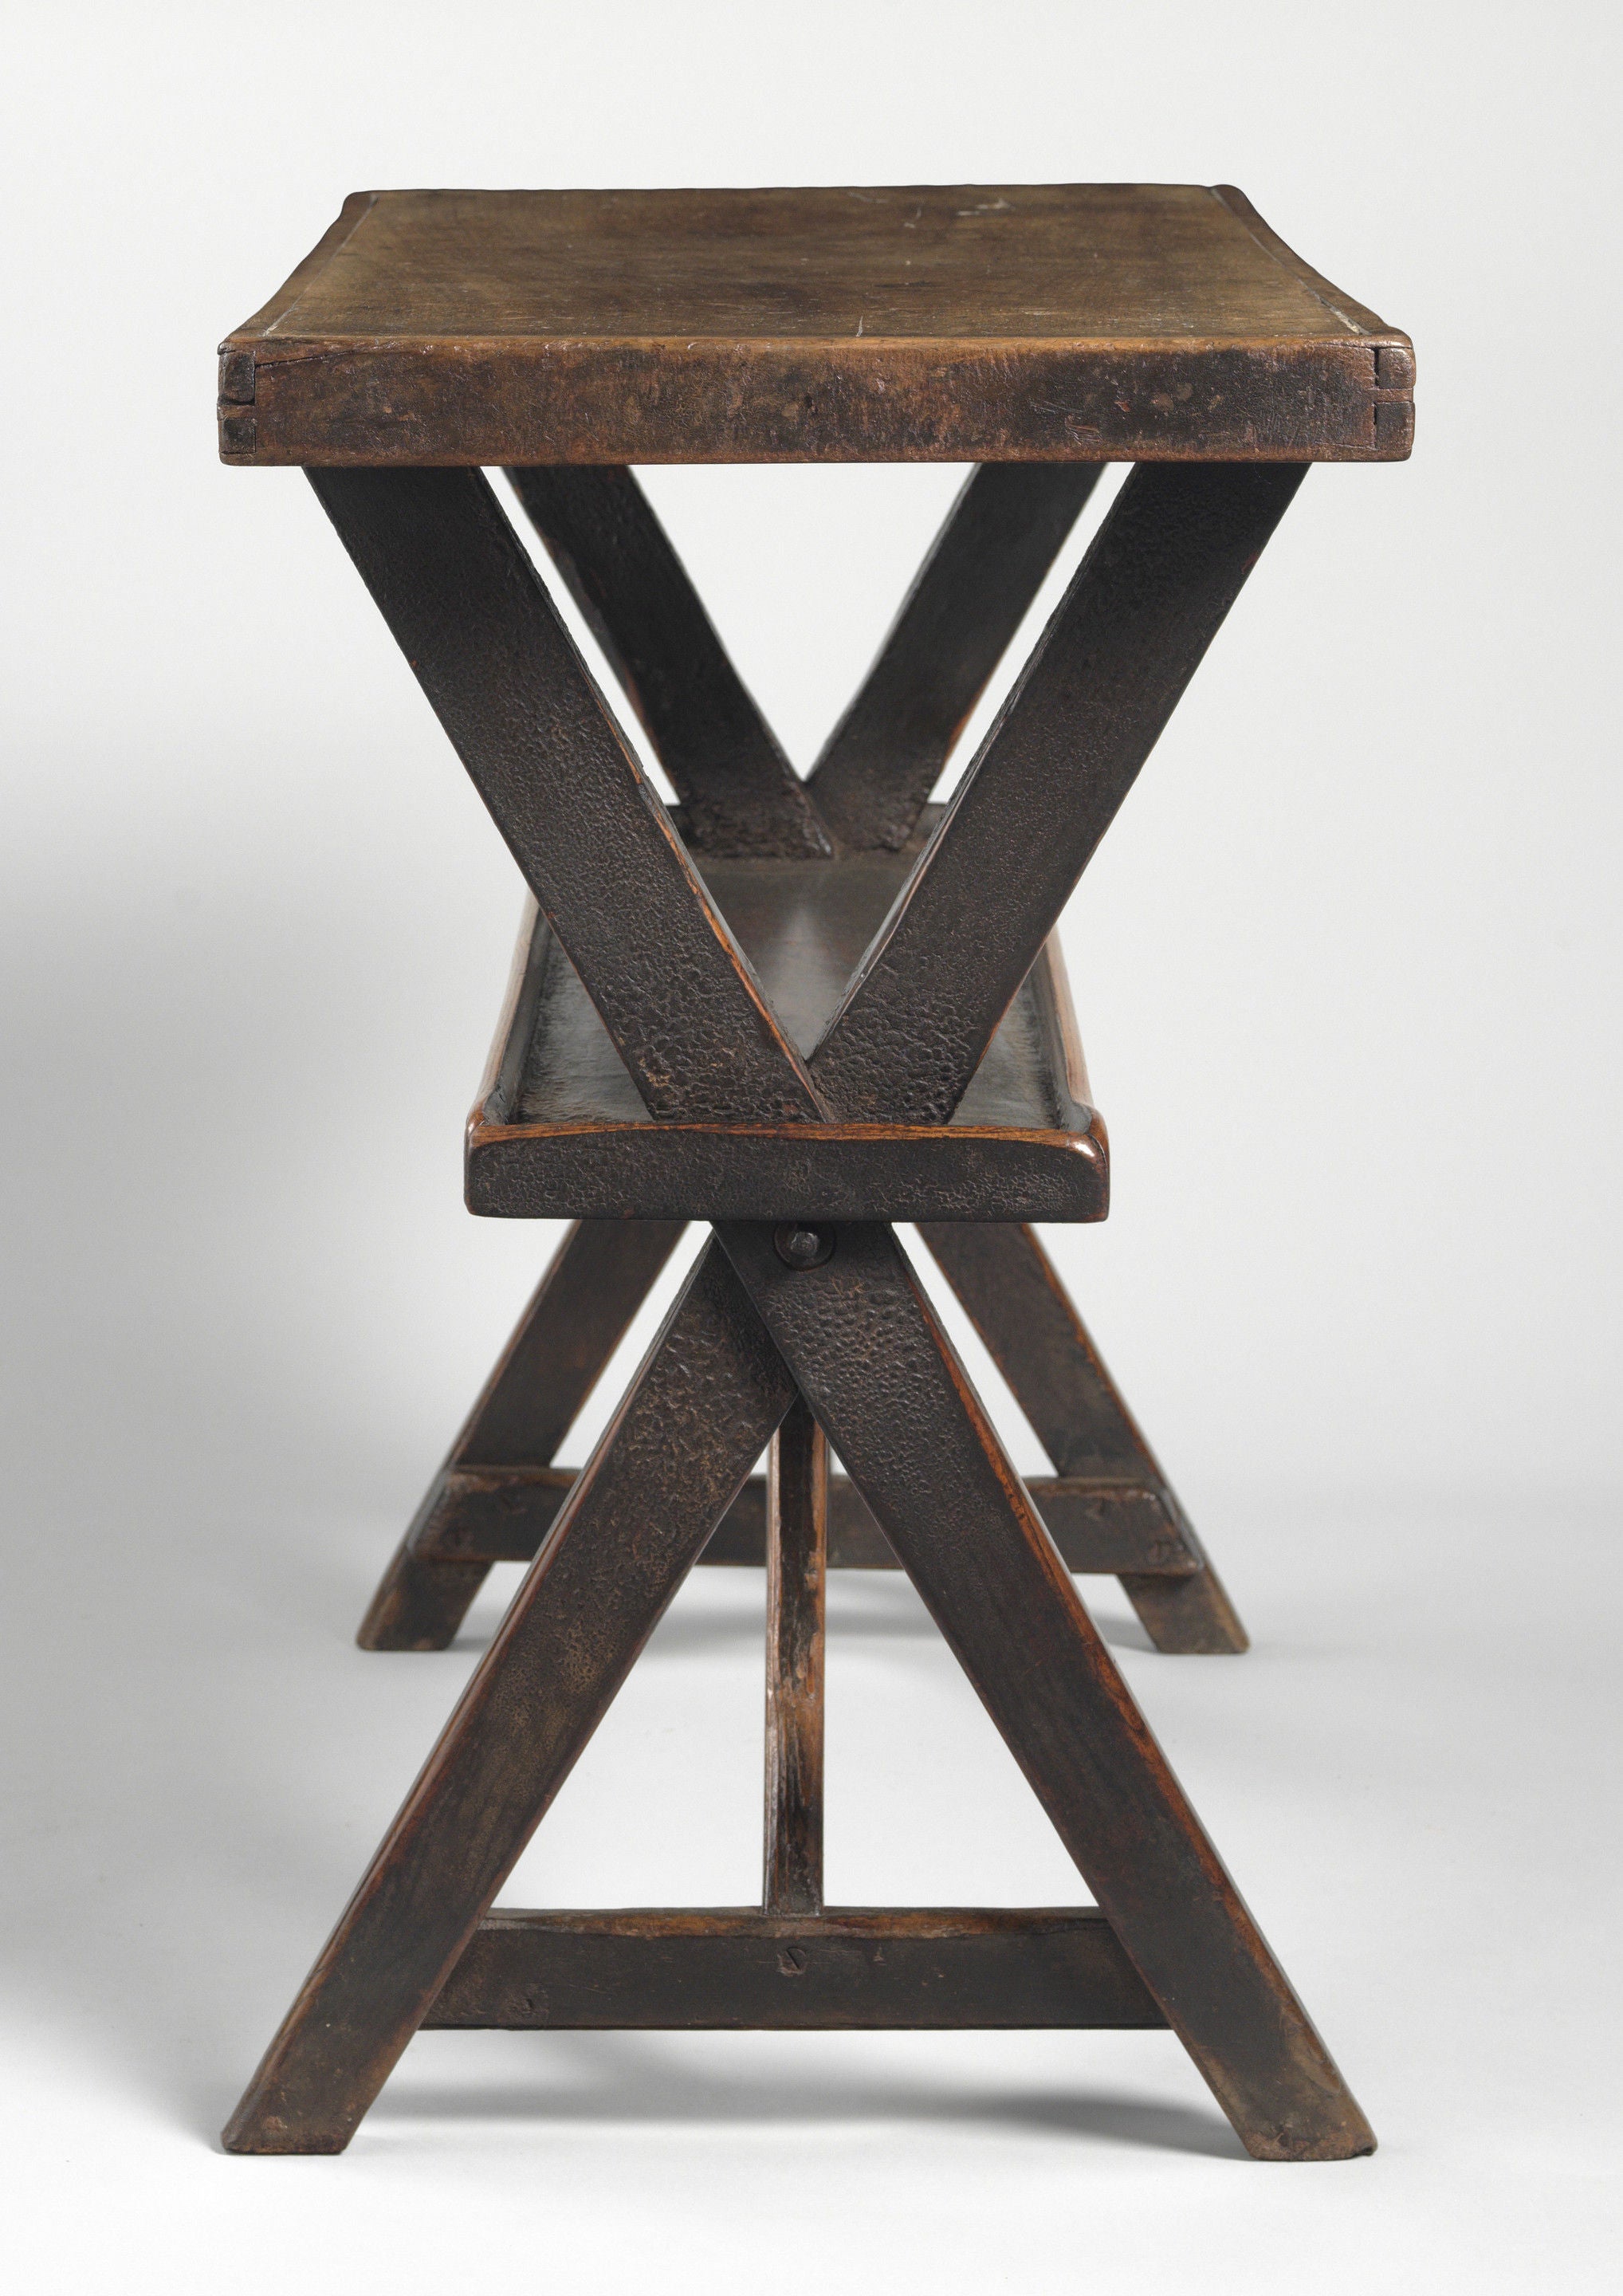 Two Sculptural Early Tavern Tables